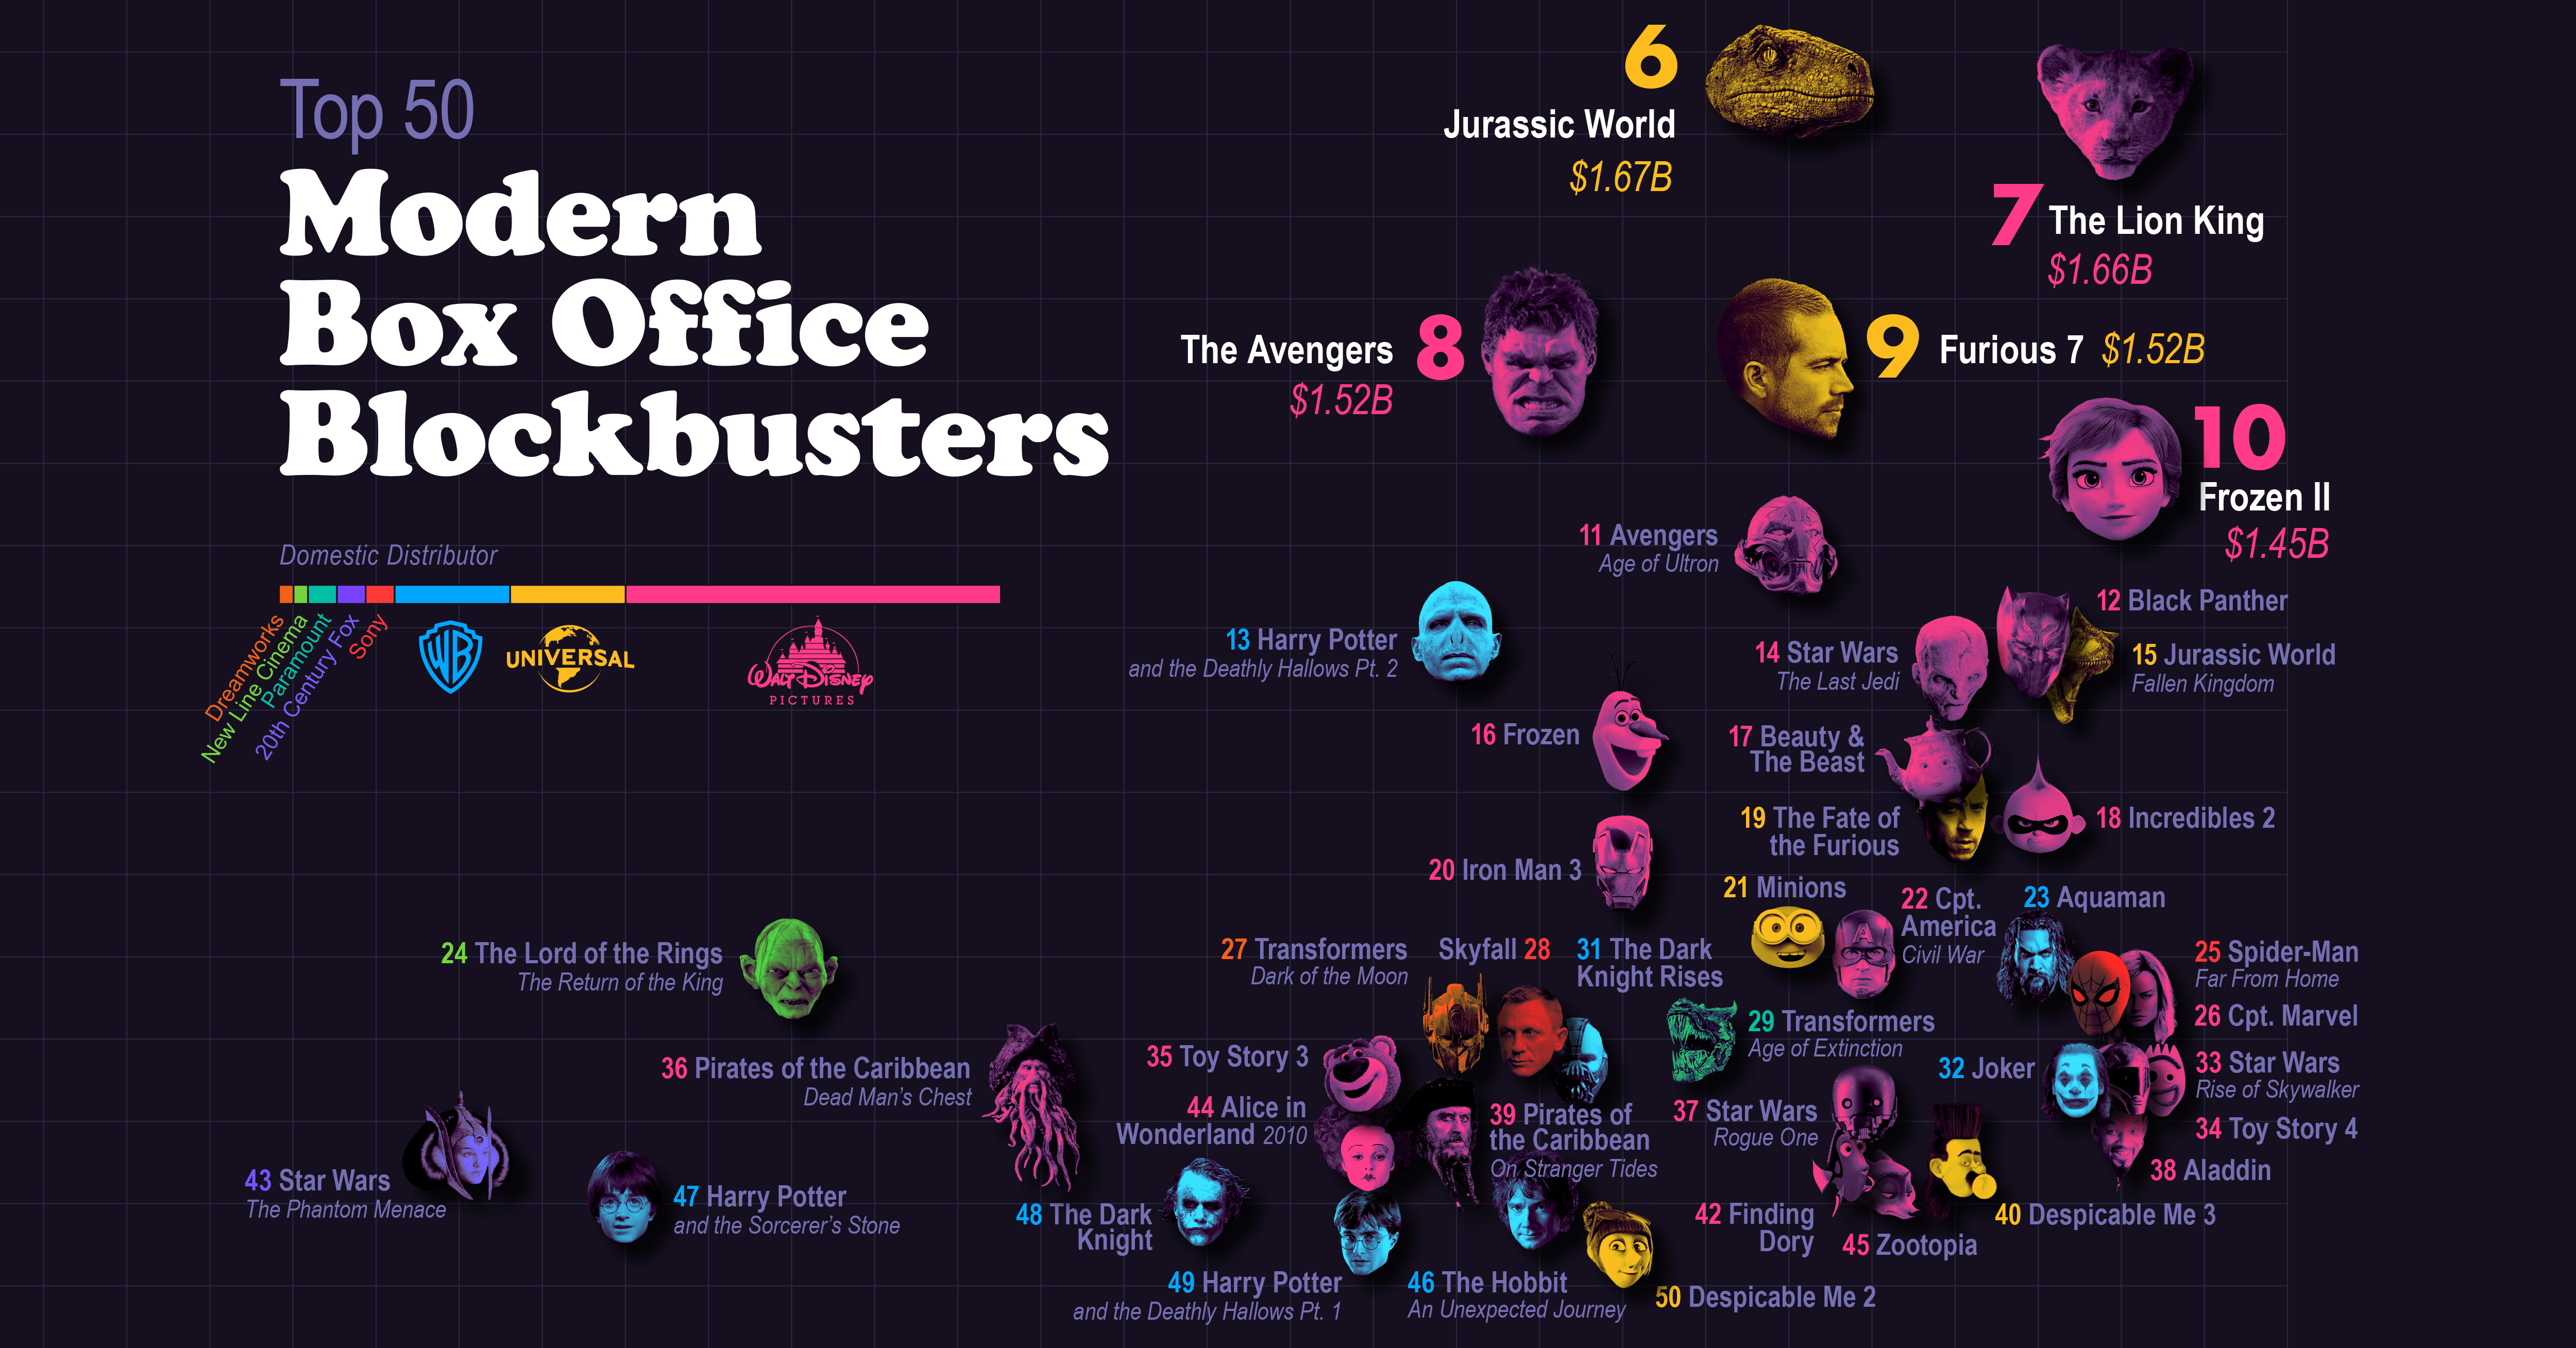 Box Office Blockbusters: The Top Grossing Movies in the Last 30 Years